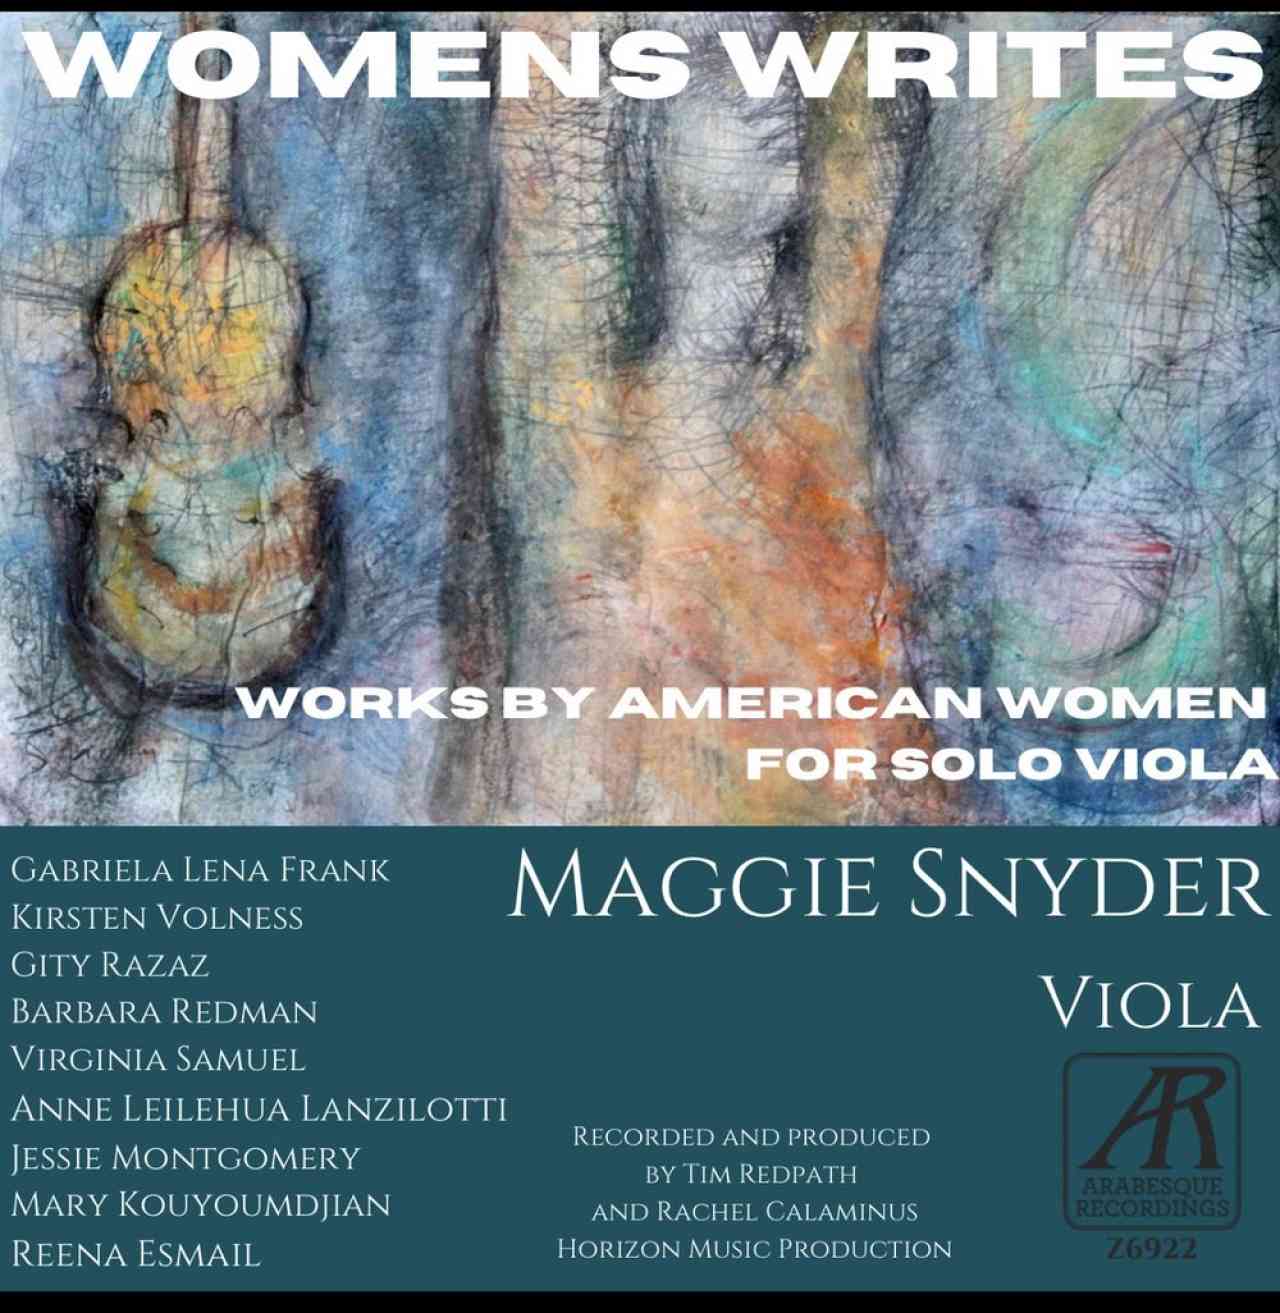 Figure 1. The cover of Maggie Synder’s recording, published by Arabesque Recordings.